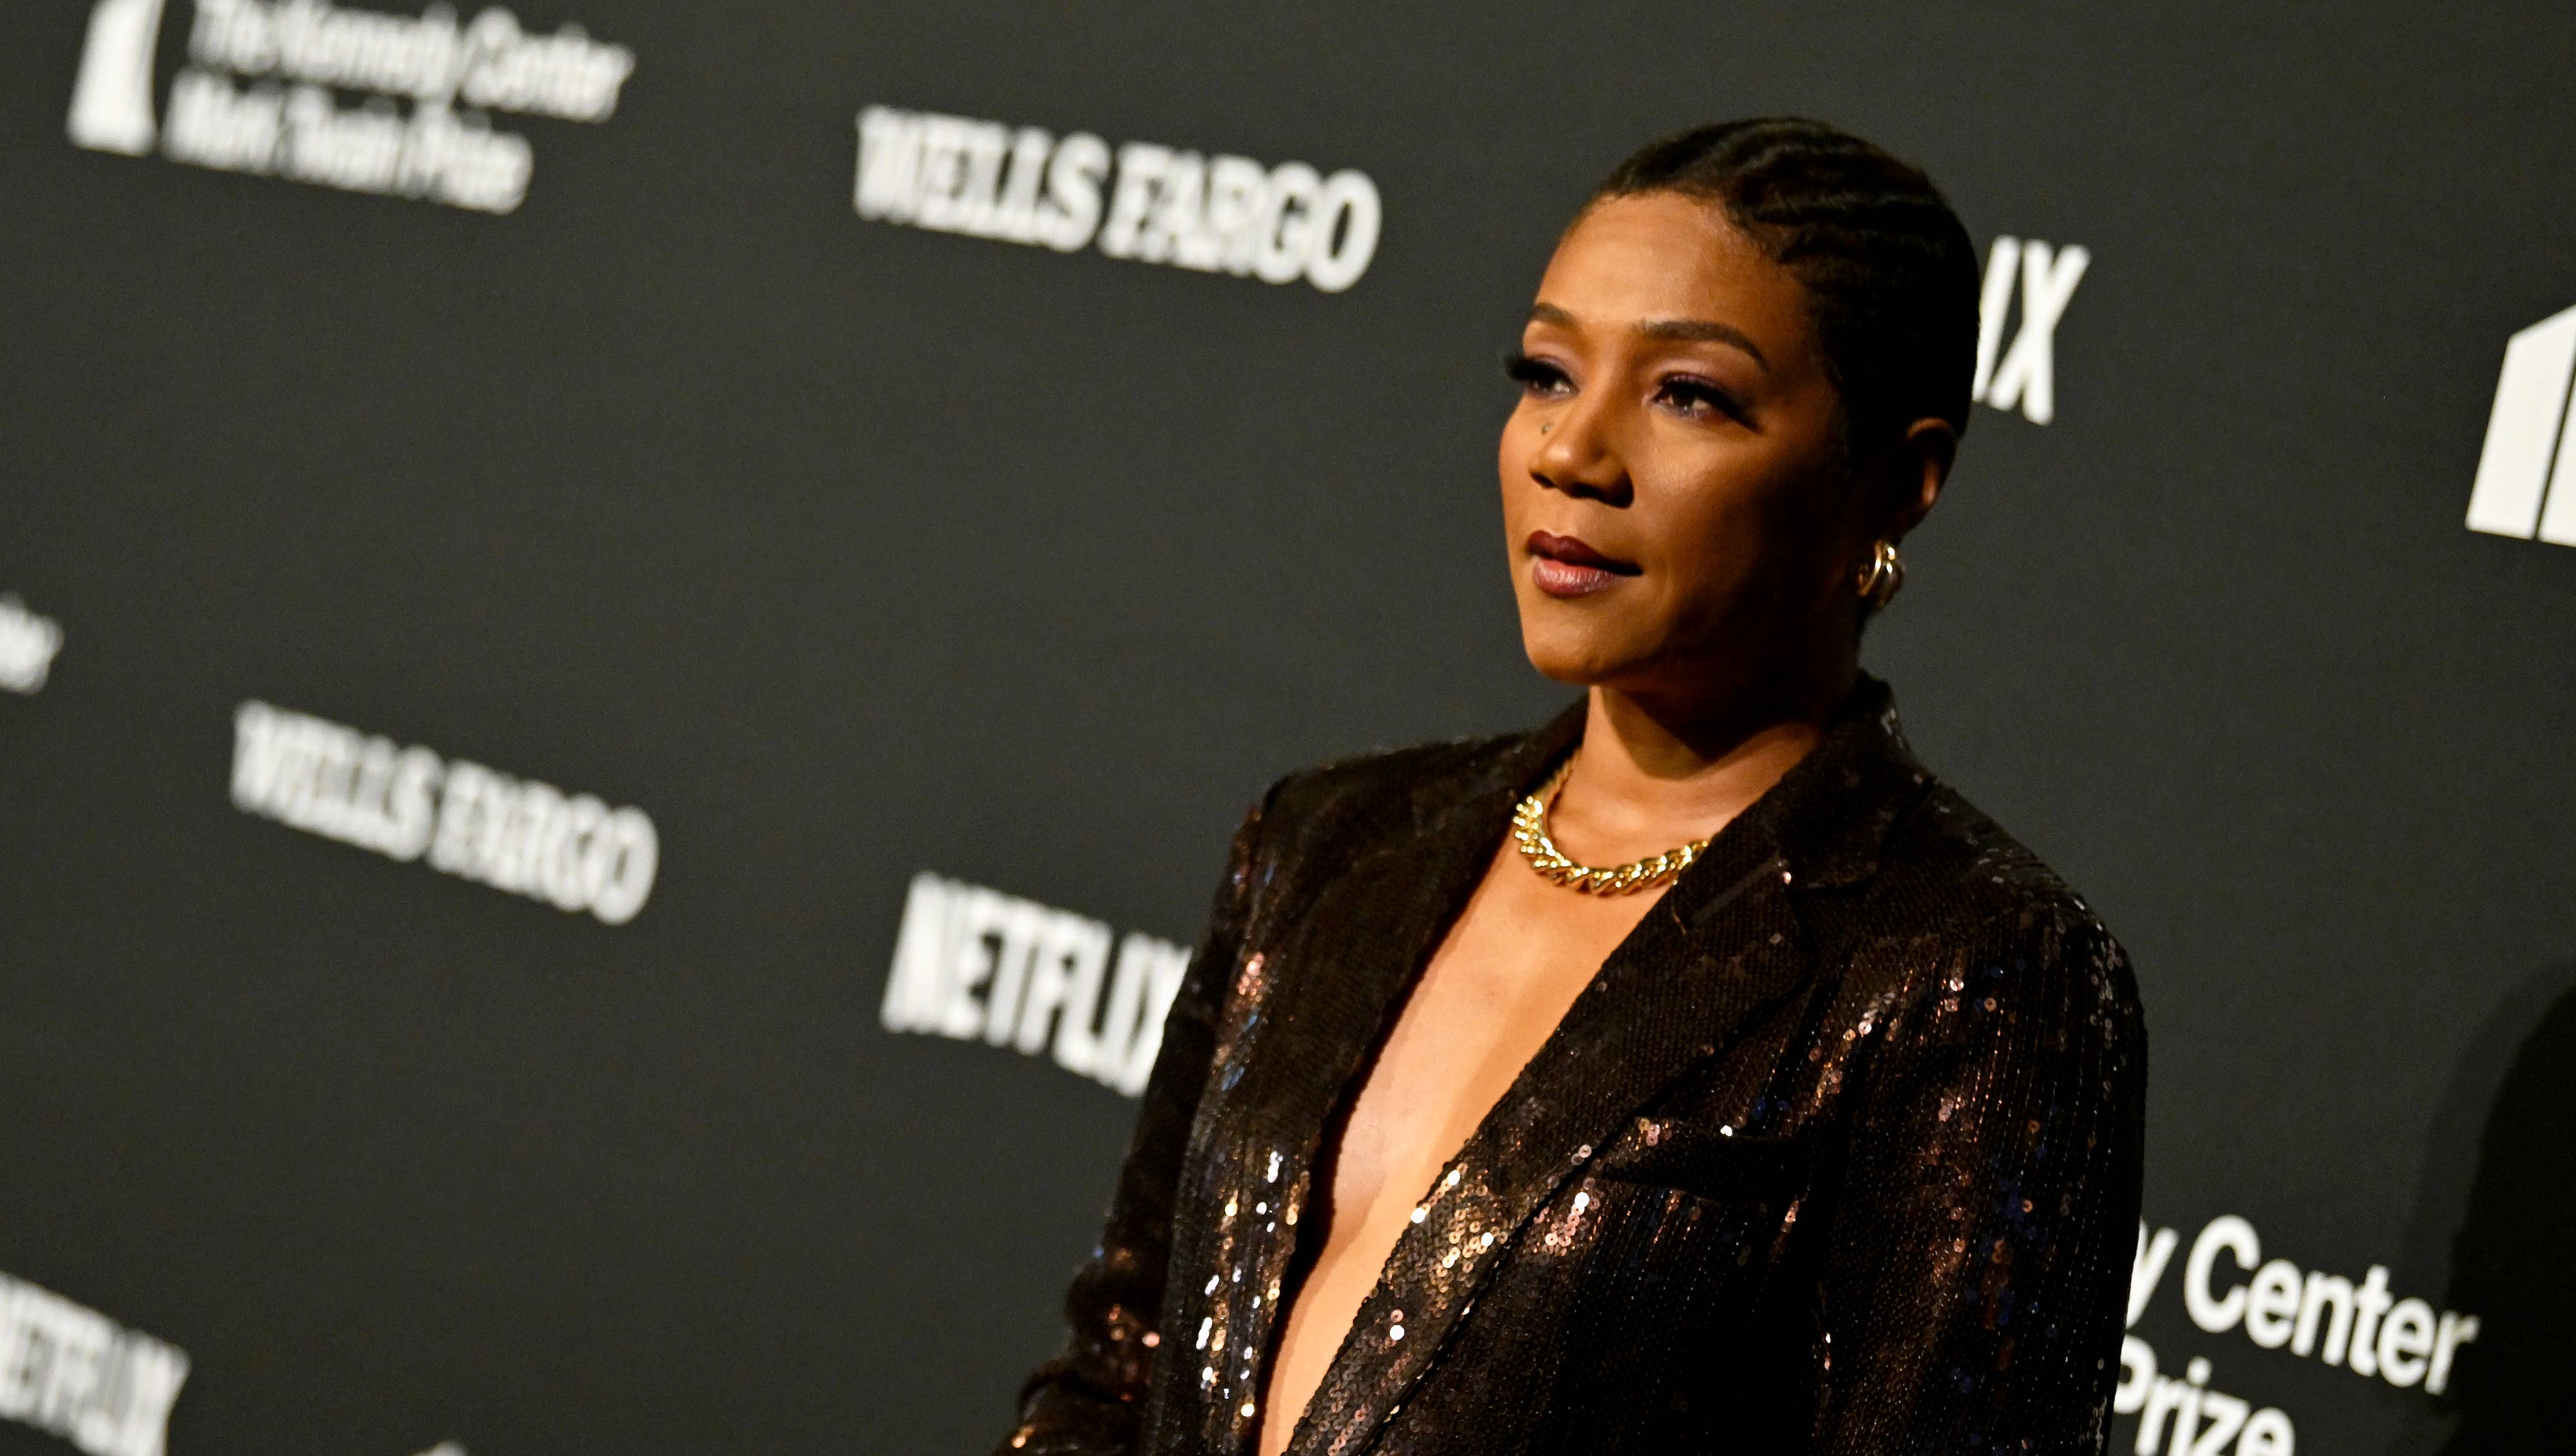 Tiffany Haddish Opens Up About Endometriosis Battle and Suffering 8 Miscarriages: ‘My Body Be Playing Tricks on Me’